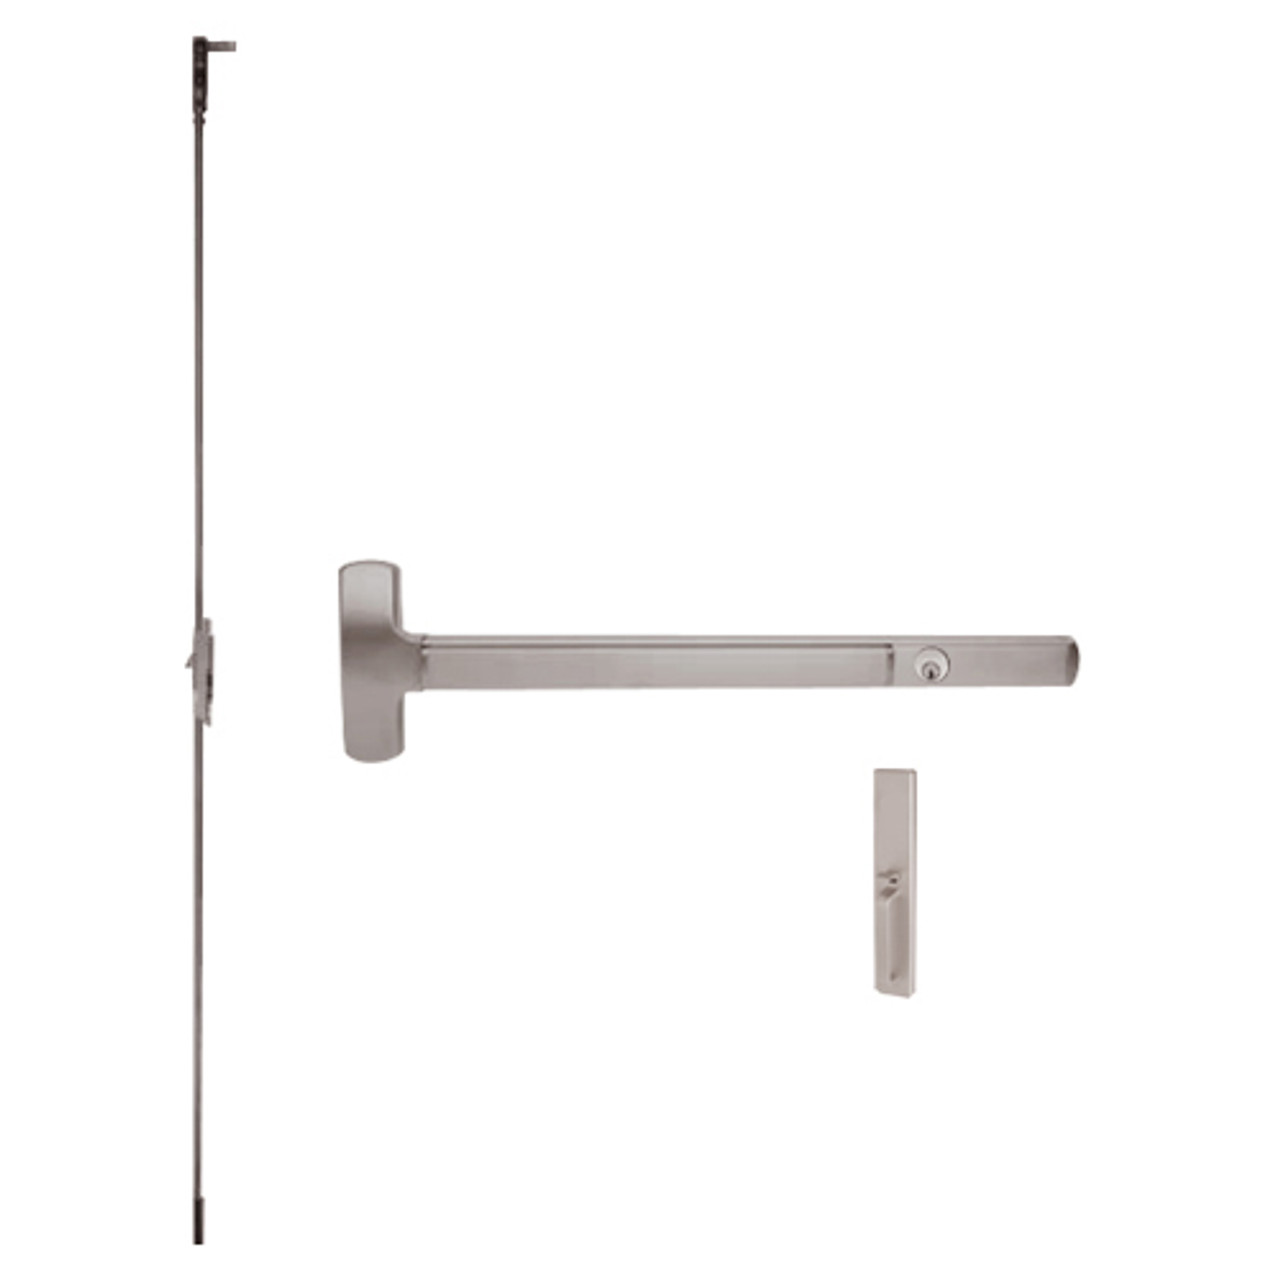 CD25-C-TP-BE-US28-4 Falcon Exit Device in Anodized Aluminum